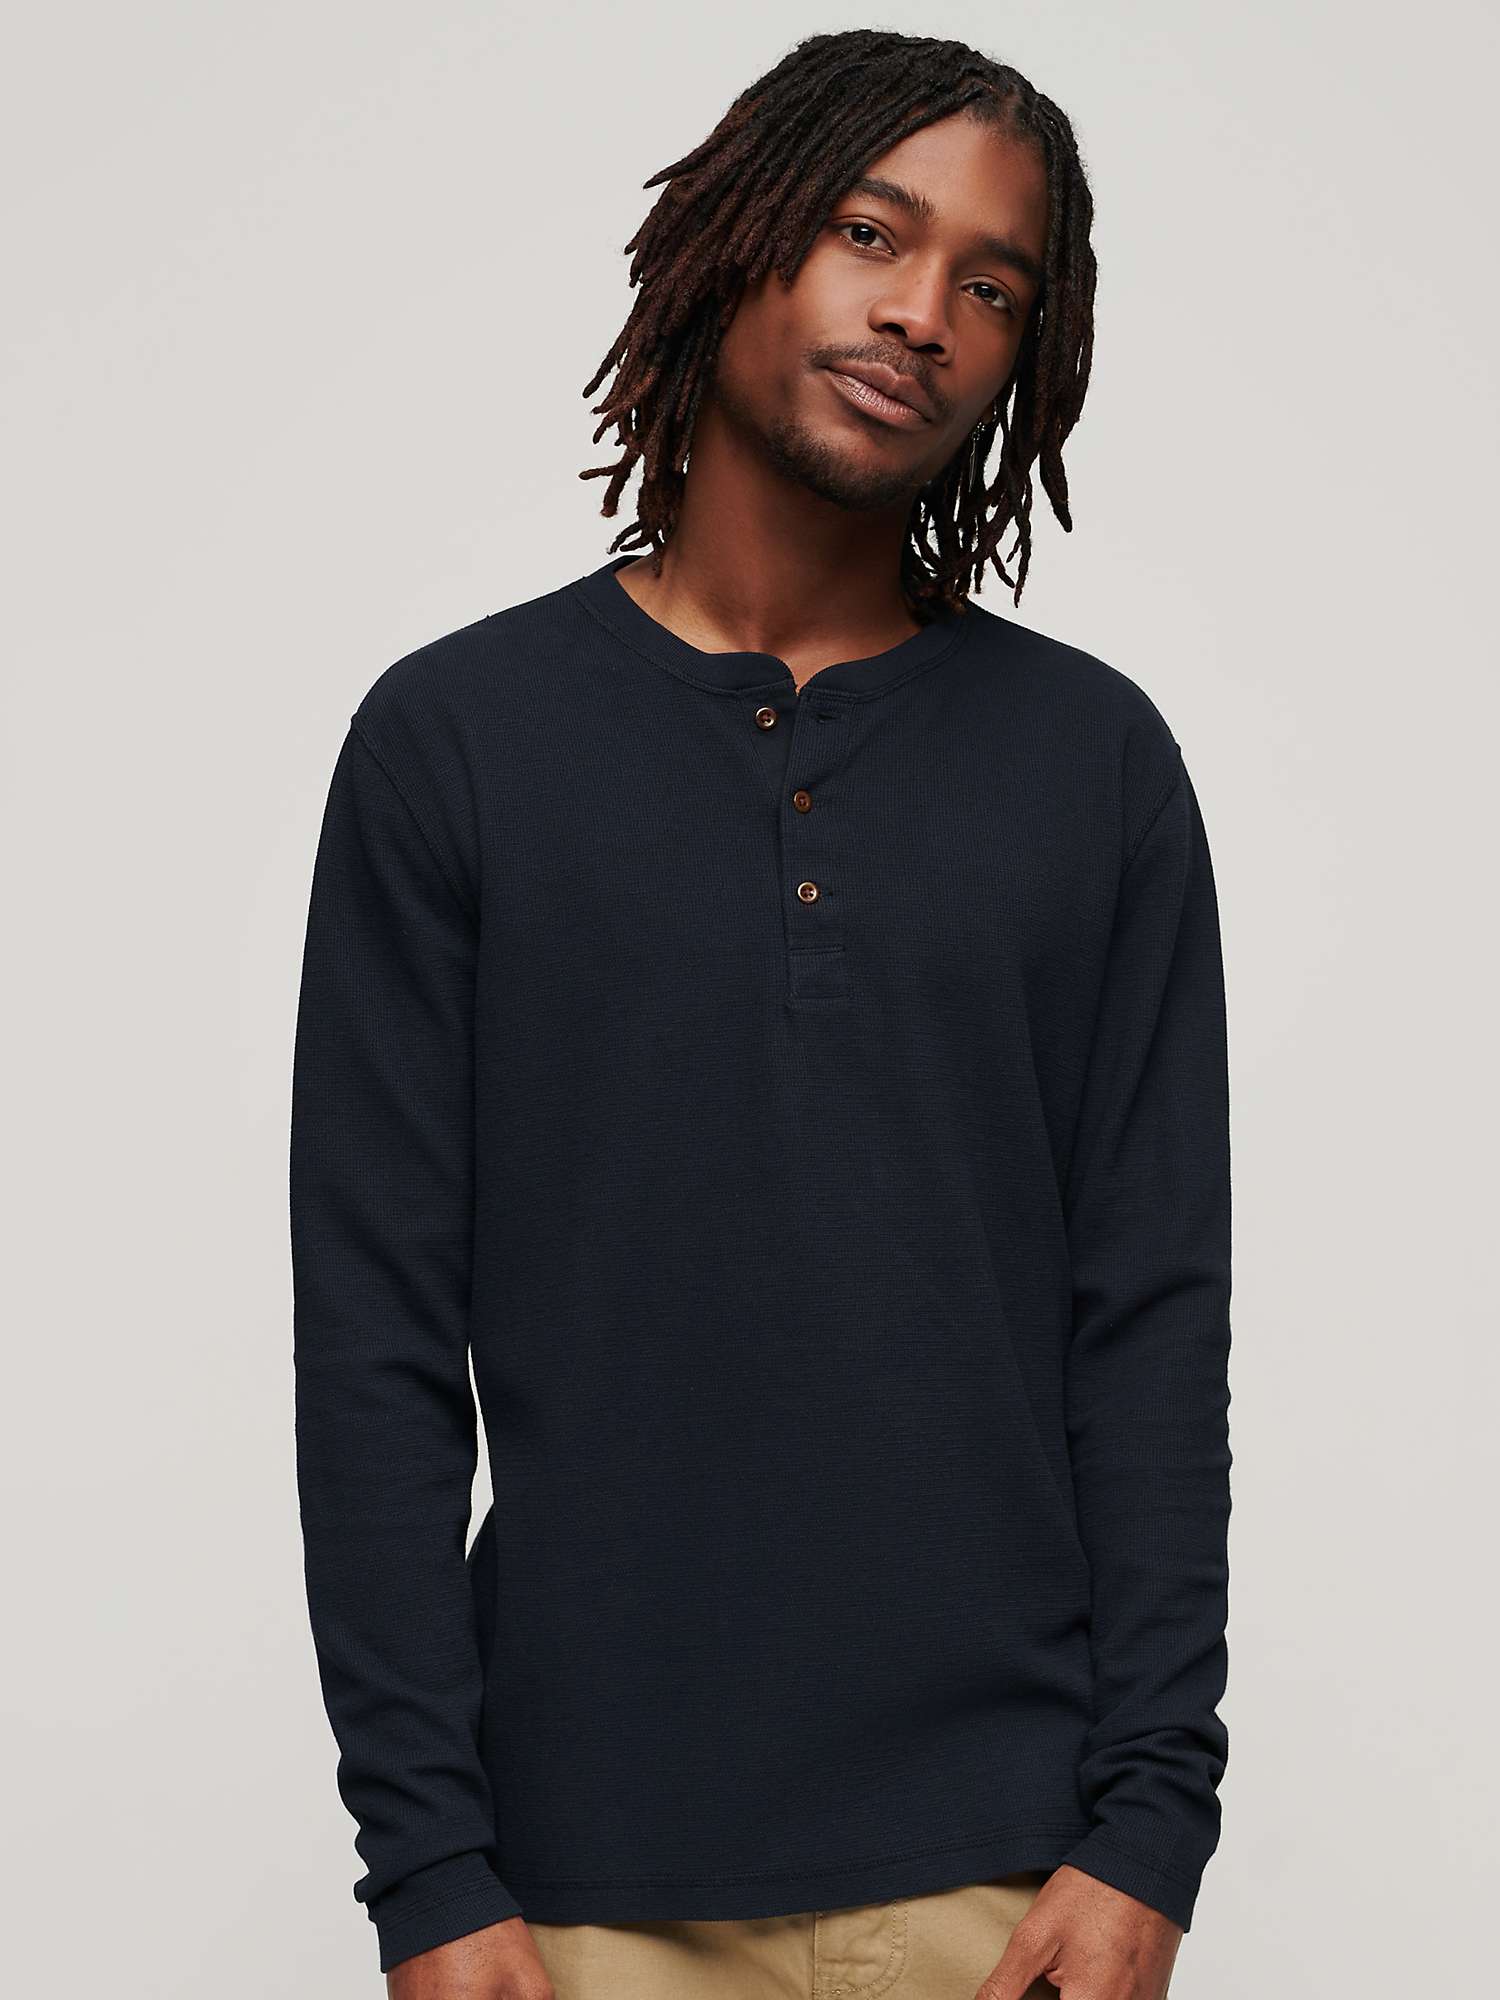 Buy Superdry Organic Cotton Long Sleeve Waffle Henley Top Online at johnlewis.com